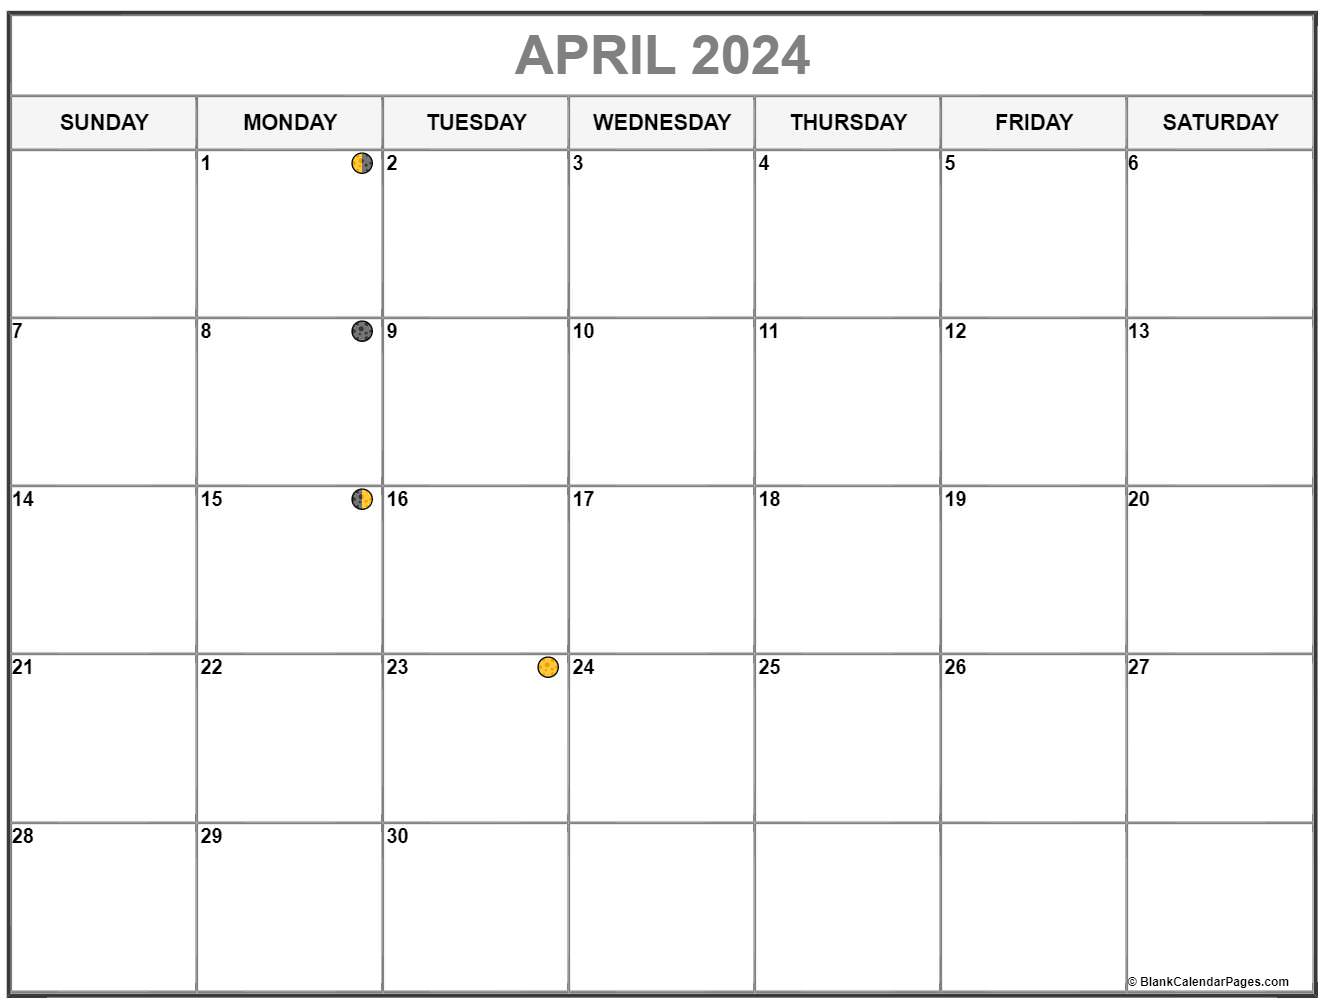 April 2024 Moon Phase Bamby Carline